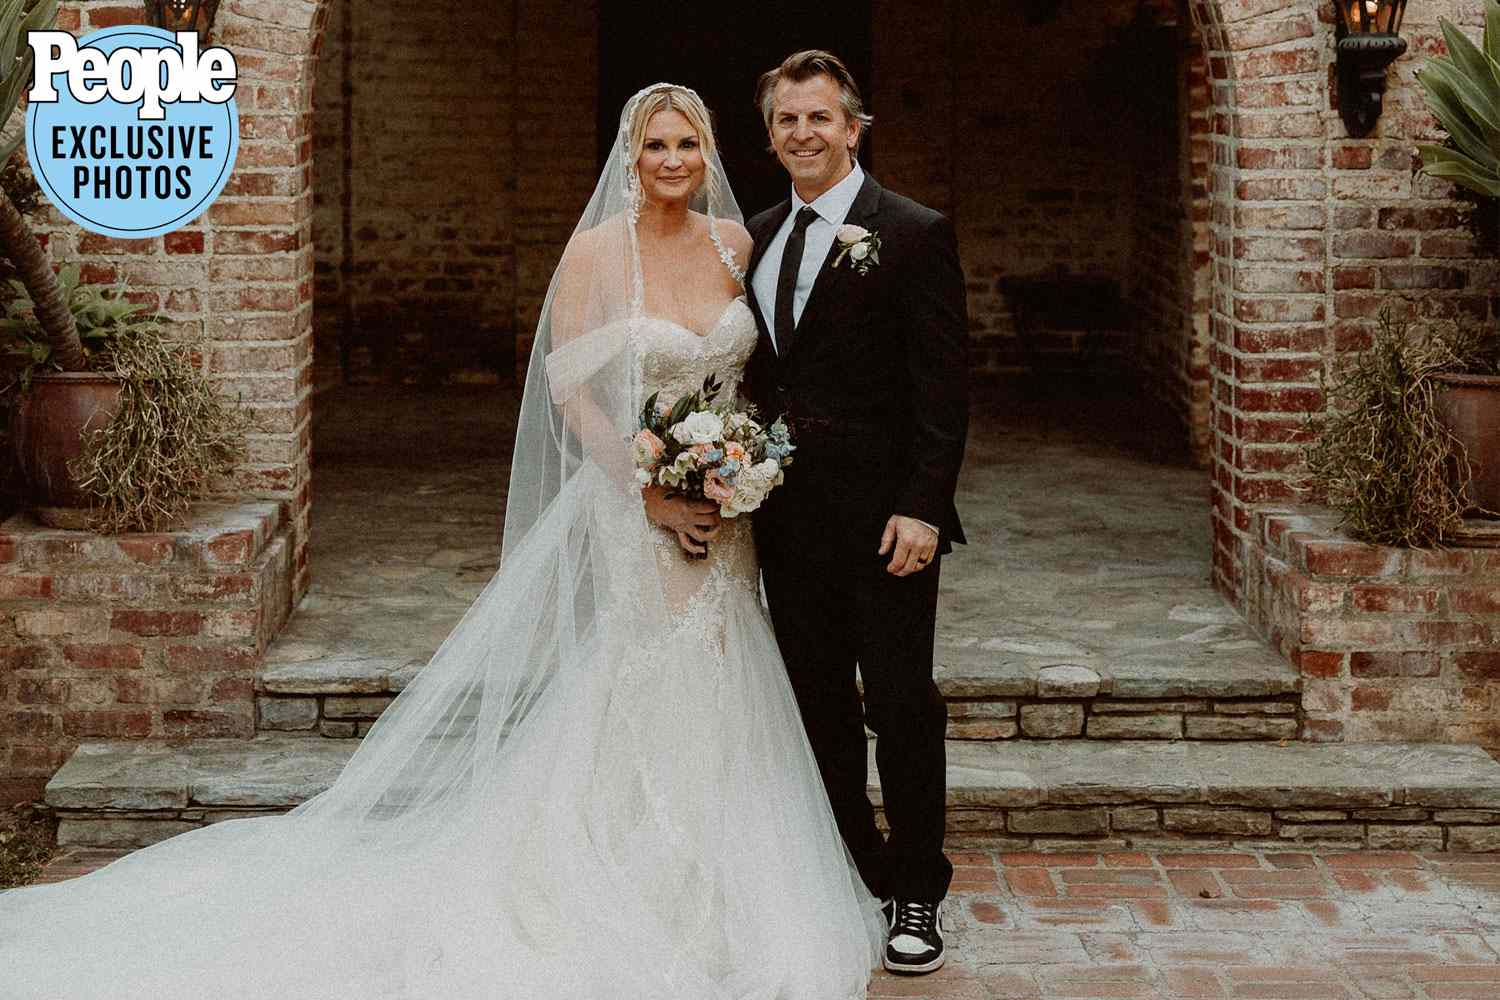 Friends Actress Bonnie Somerville Marries Dave McClain: ‘I Believe in True Love Now, It’s Never Too Late'. Credit: Gina & Ryan Photography